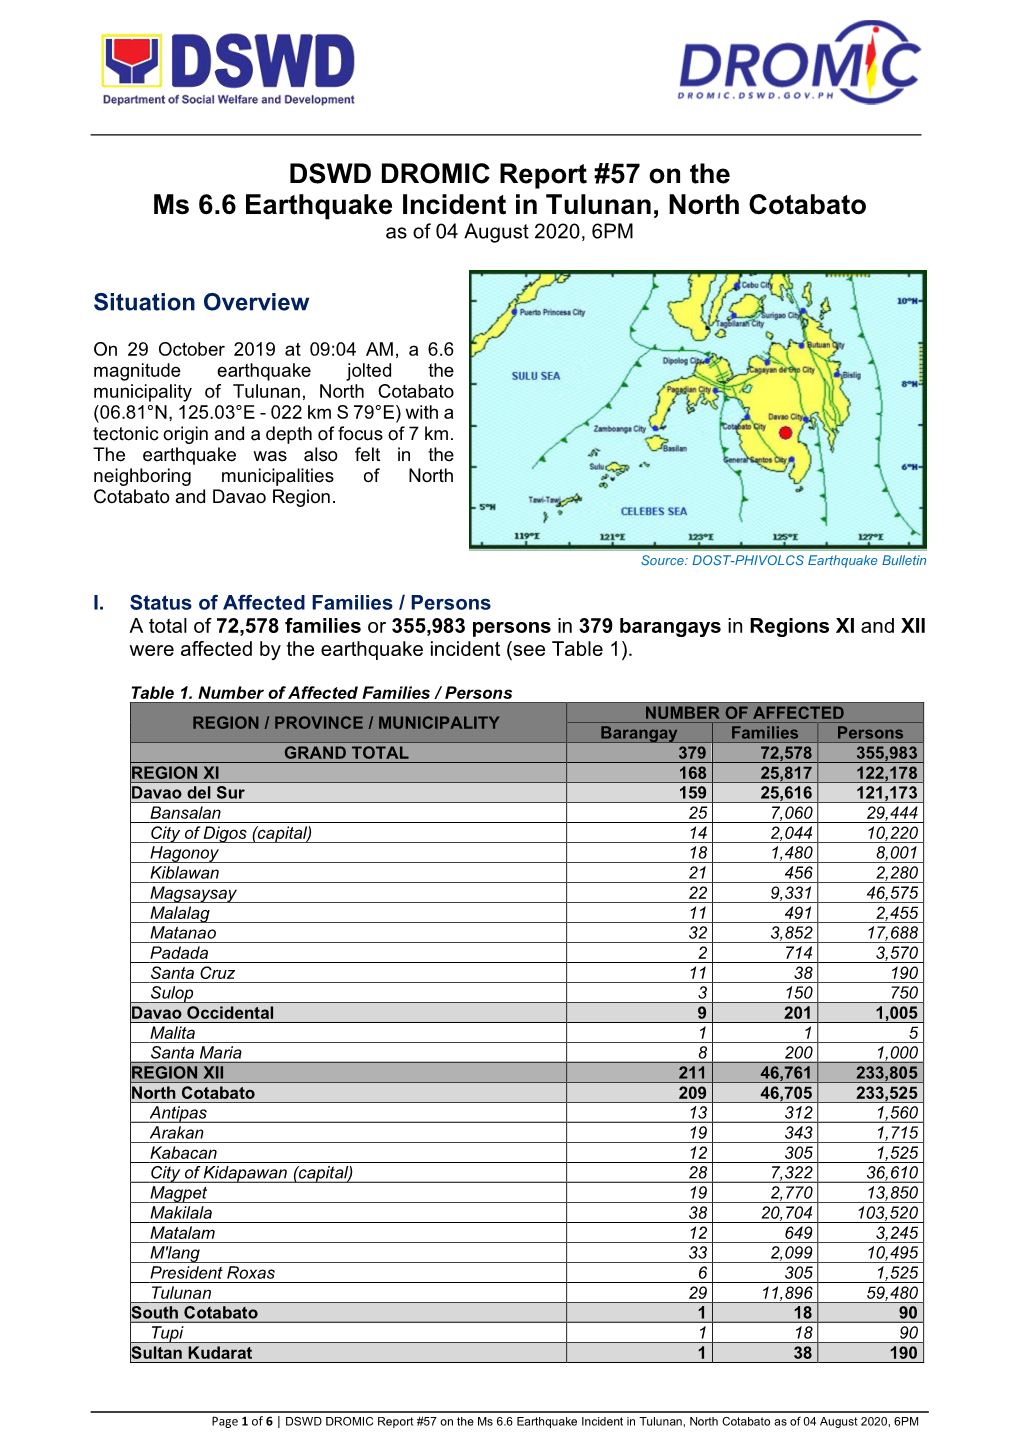 DSWD DROMIC Report #57 on the Ms 6.6 Earthquake Incident in Tulunan, North Cotabato As of 04 August 2020, 6PM